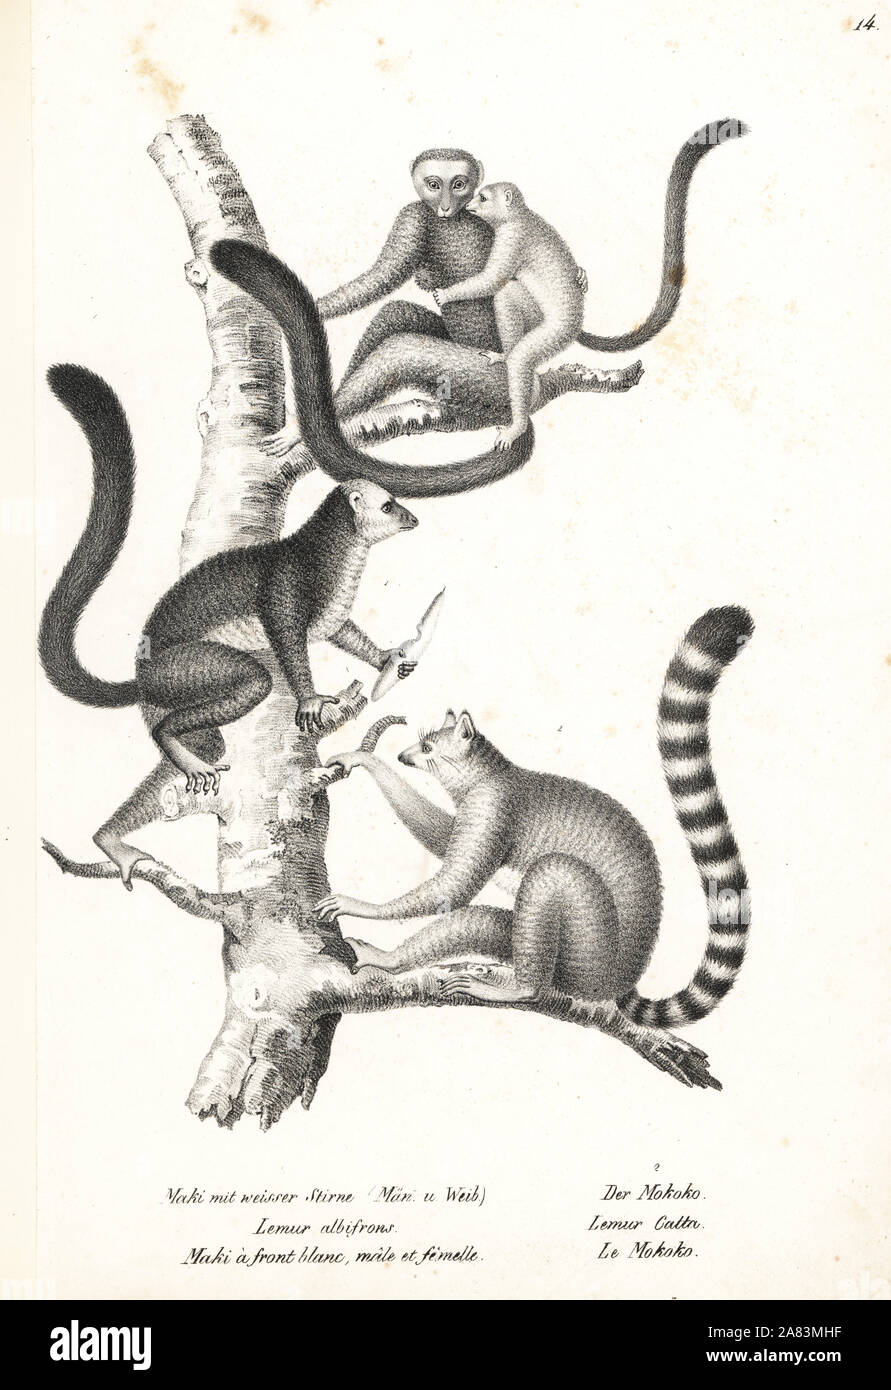 White-headed lemur, Eulemur albifrons, male and female, endangered 1, and ring-tailed lemur, Lemur catta, endangered 2. Lithograph by Karl Joseph Brodtmann from Heinrich Rudolf Schinz's Illustrated Natural History of Men and Animals, 1836. Stock Photo